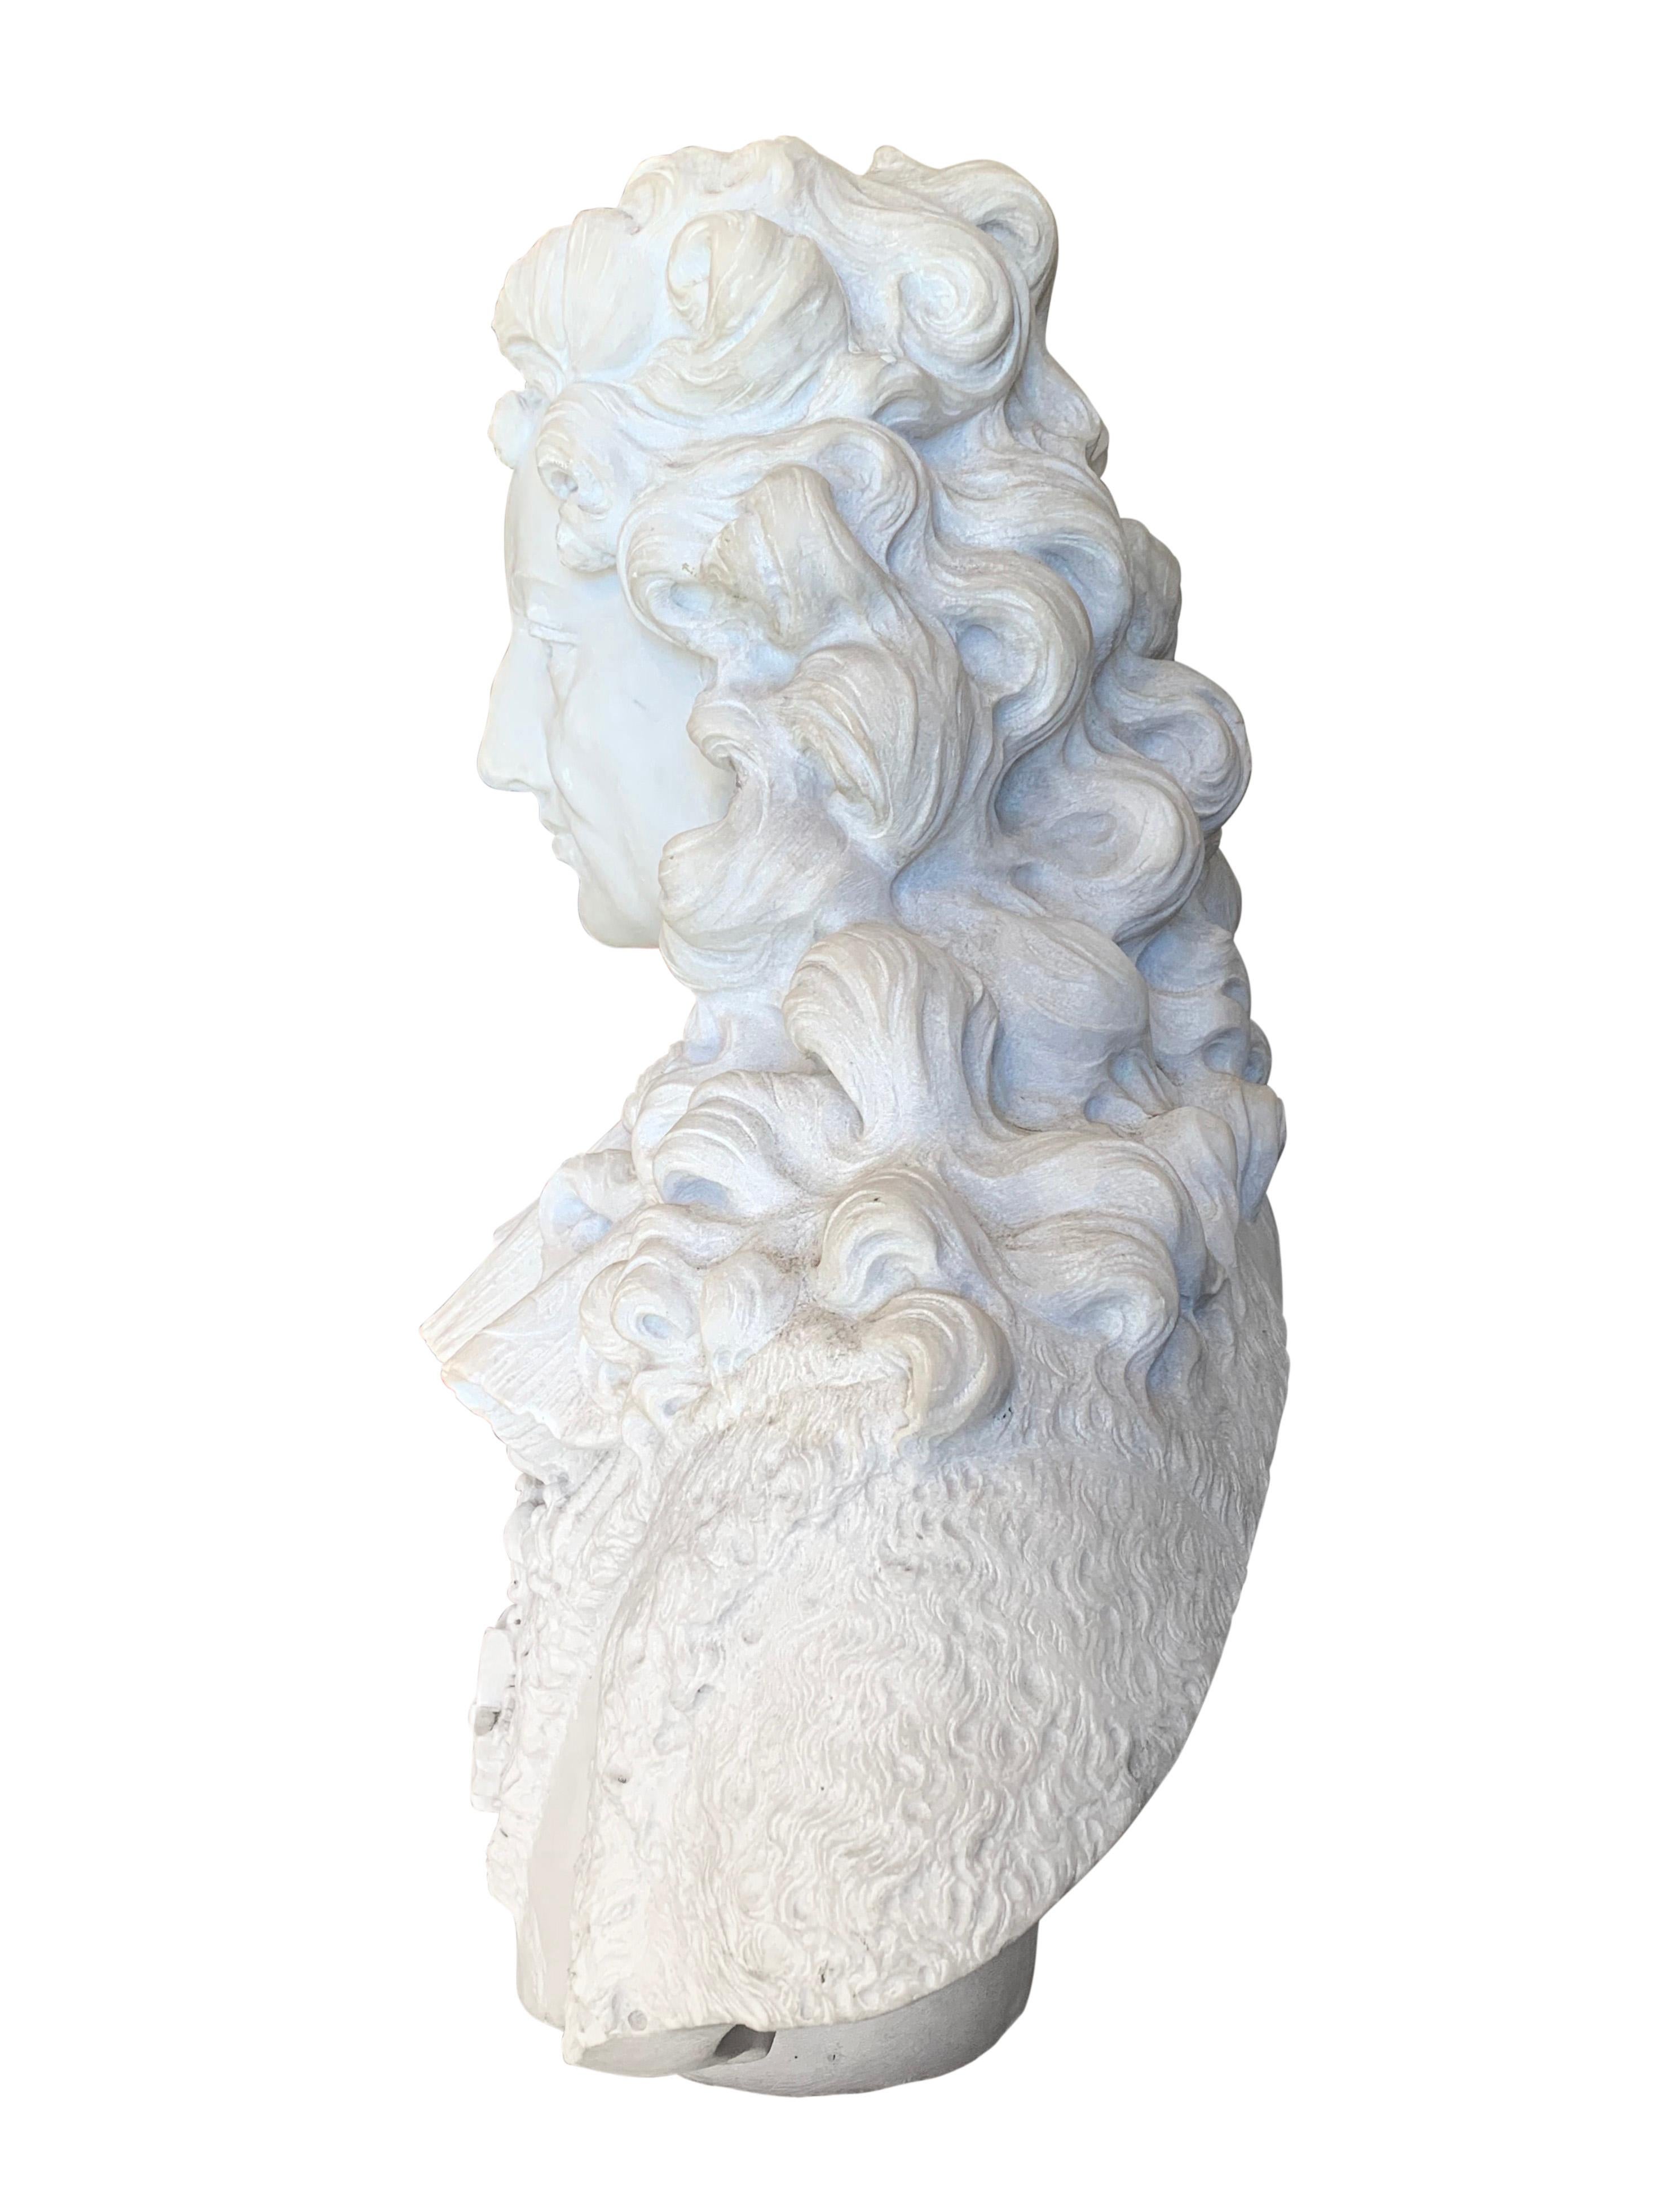 marble bust antique